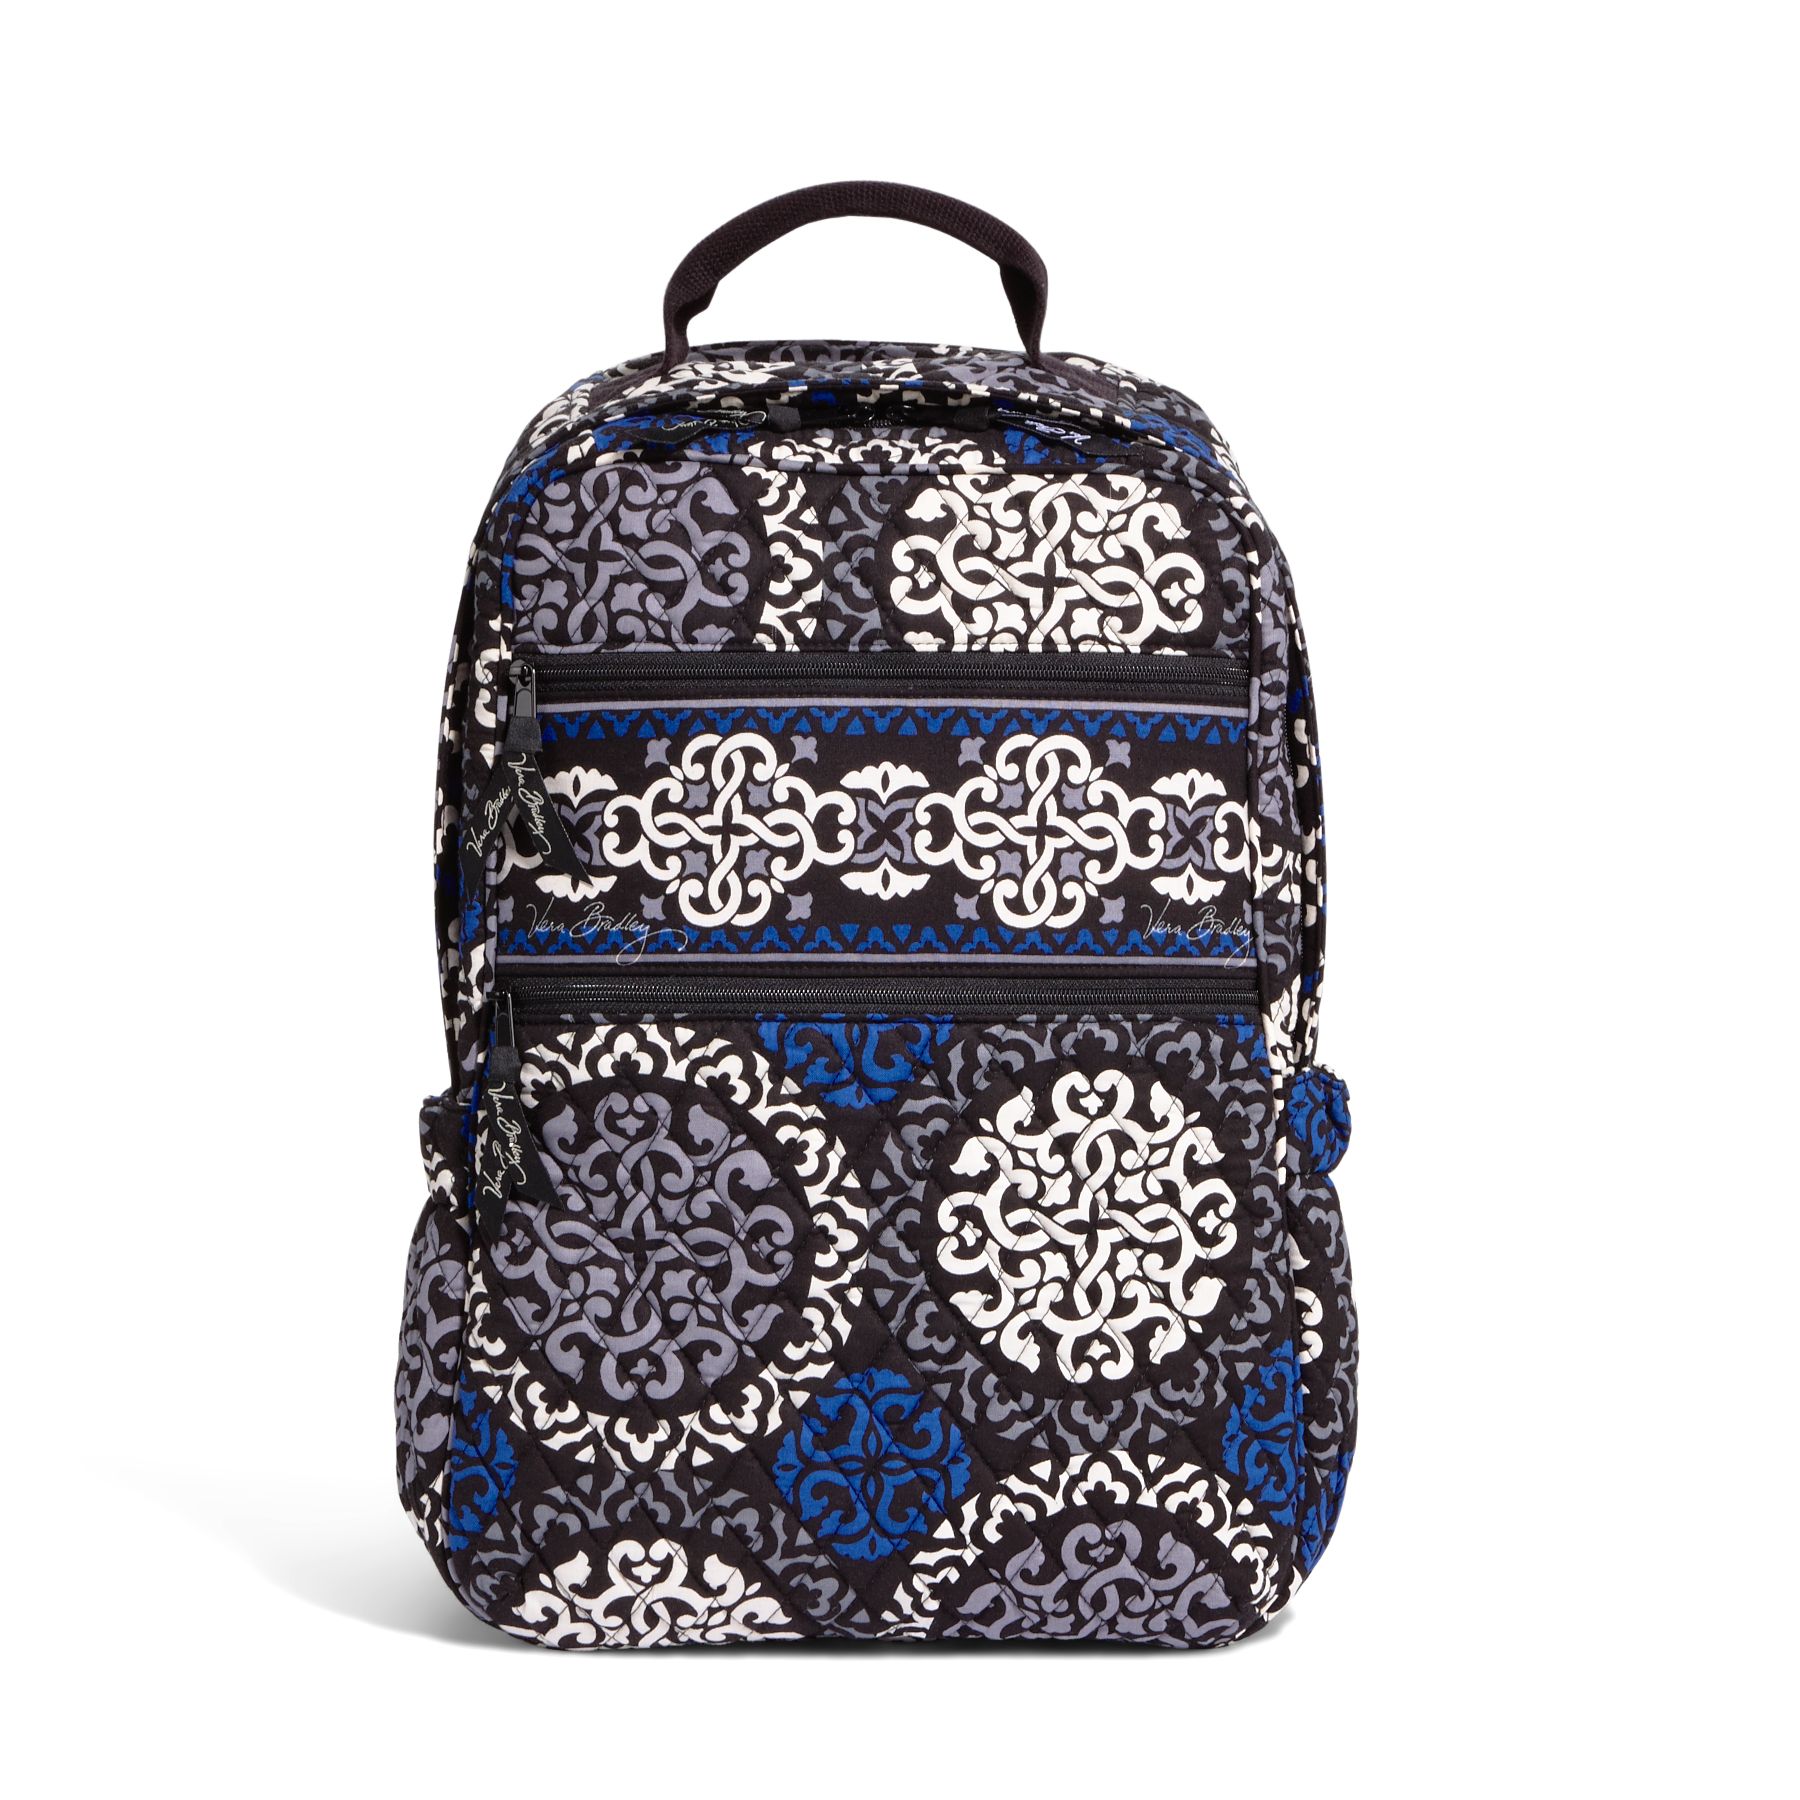 Vera Bradley Up to 60% off Holiday #DEALS